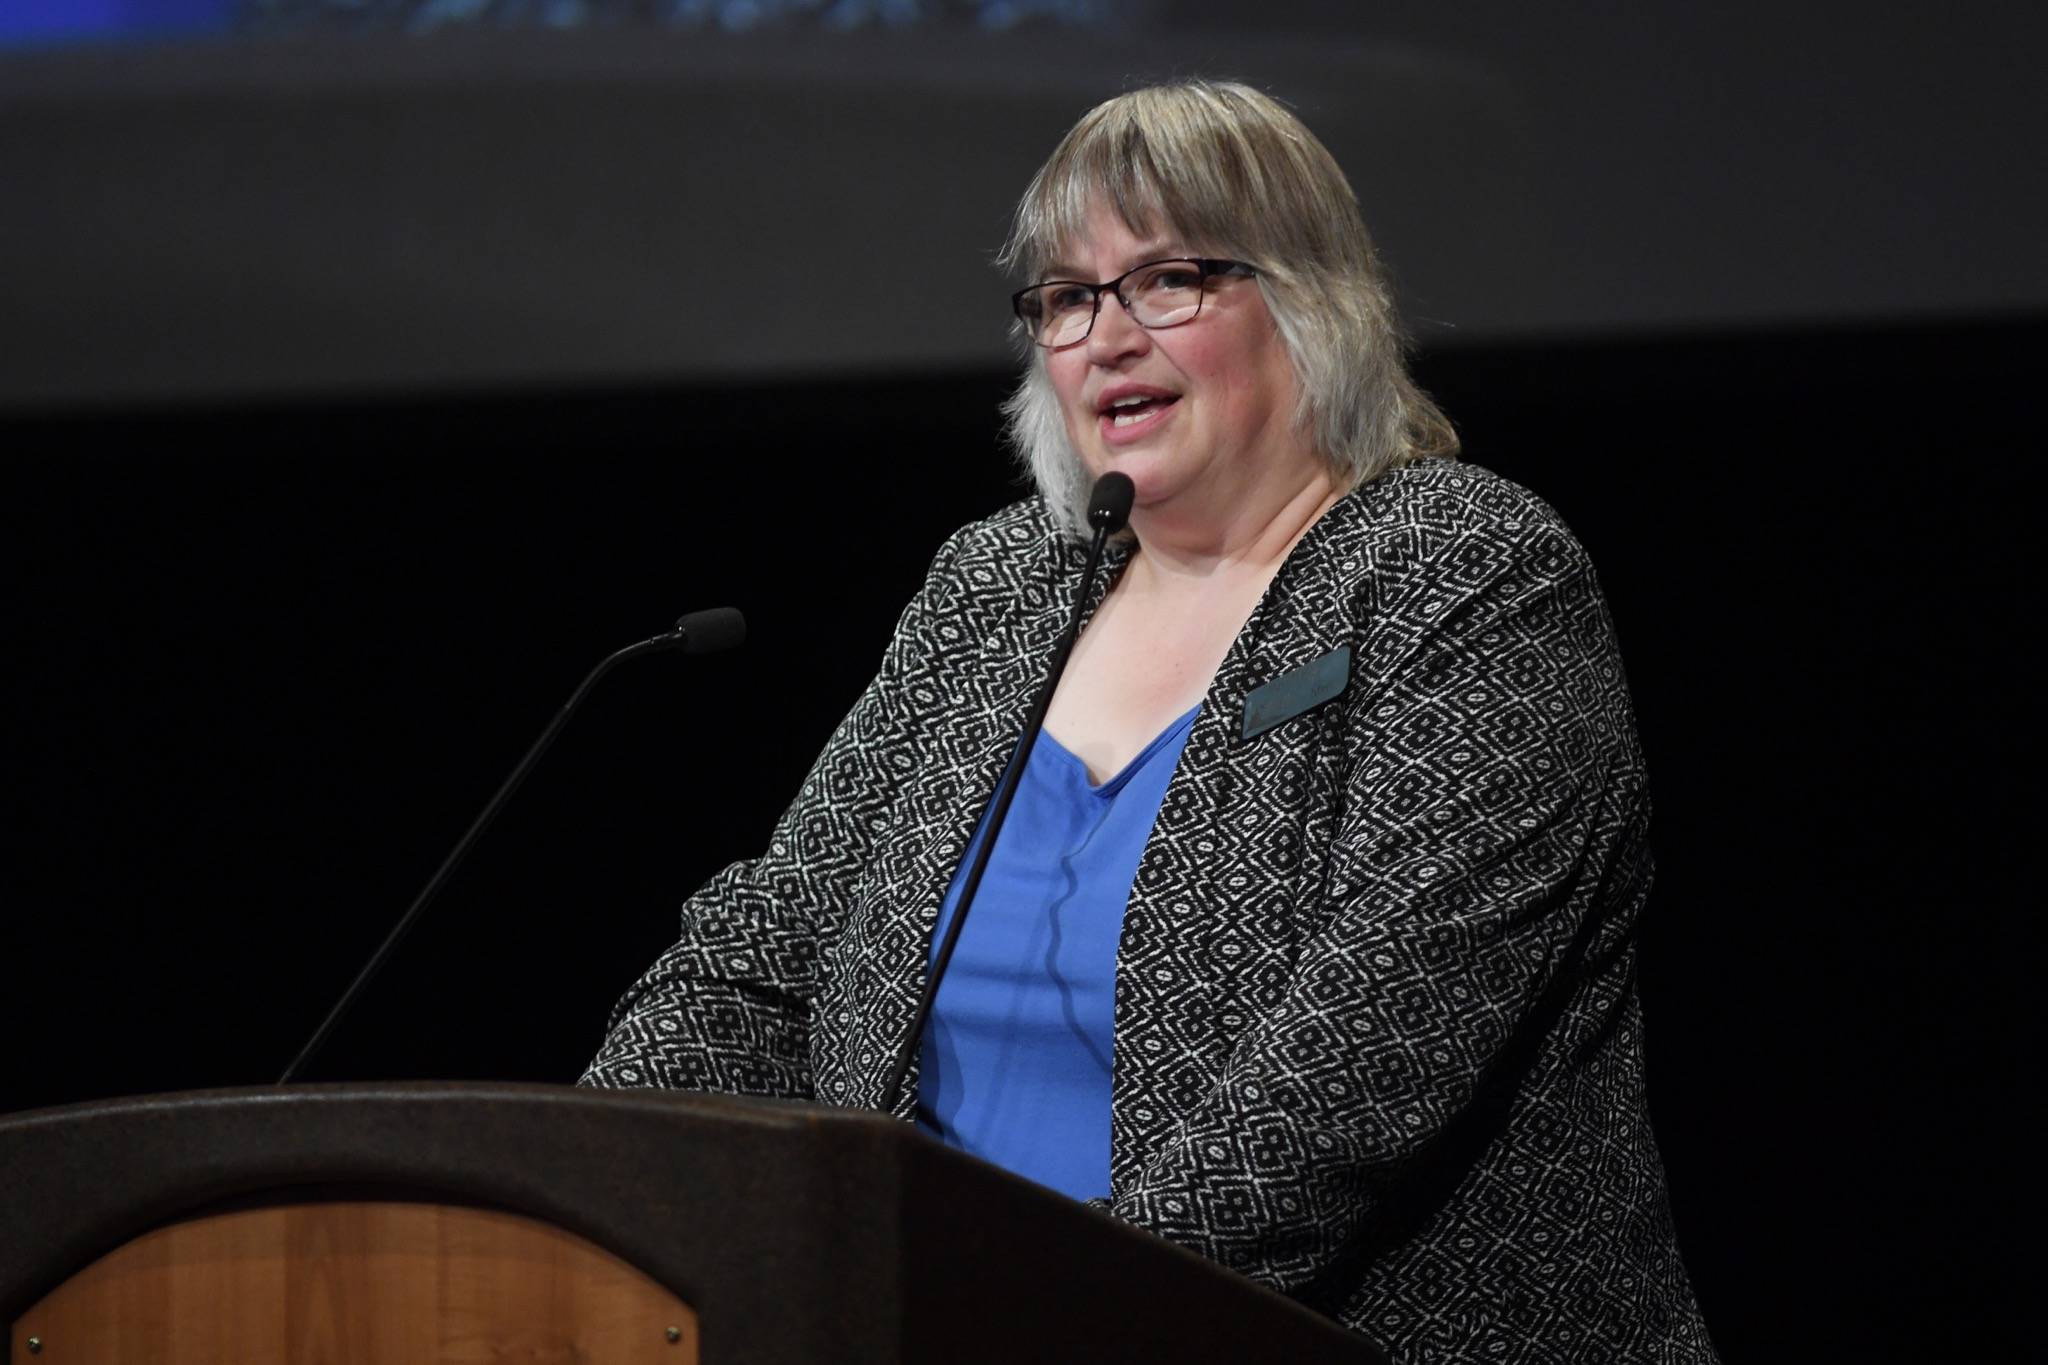 City and Borough of Juneau Beth Weldon delivers opening remarks during the International Forum of Sovereign Wealth Funds’ annual meeting at Centennial Hall, Thursday, Sept. 12, 2019. (Michael Penn | Juneau Empire)